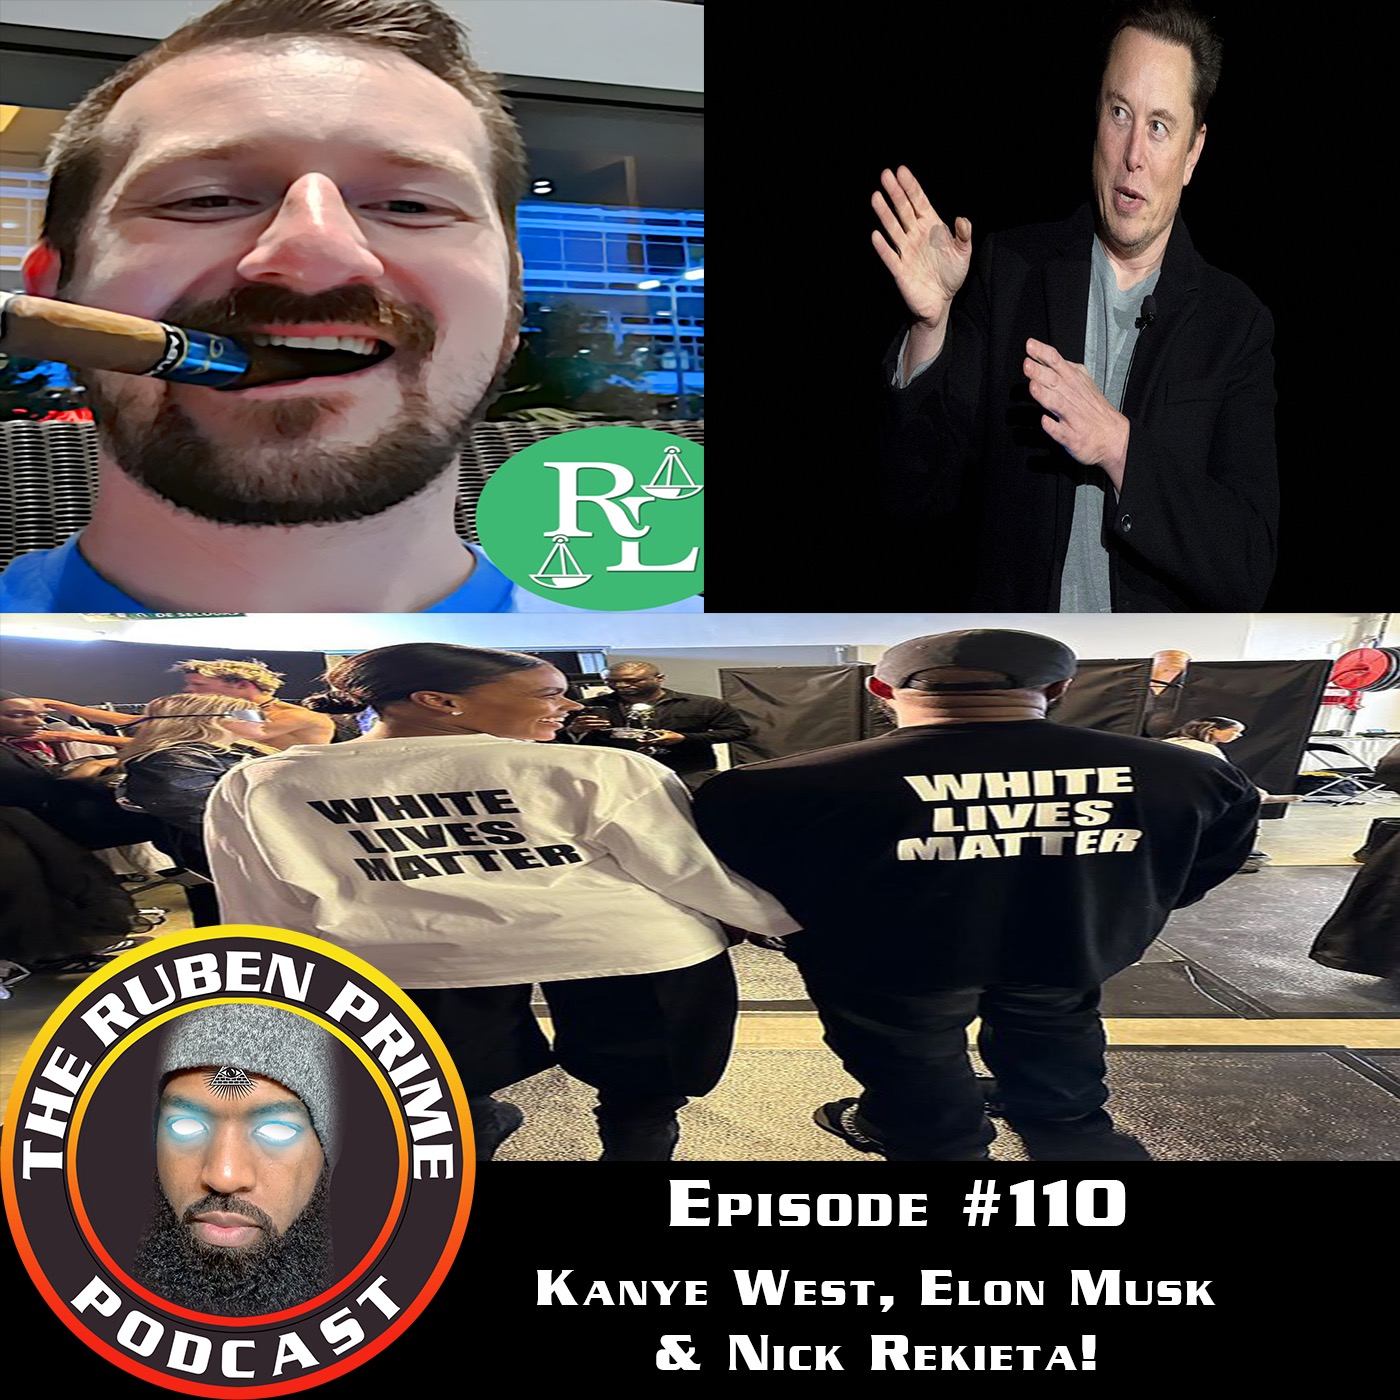 Broke And Evicted: The End of EDP445 